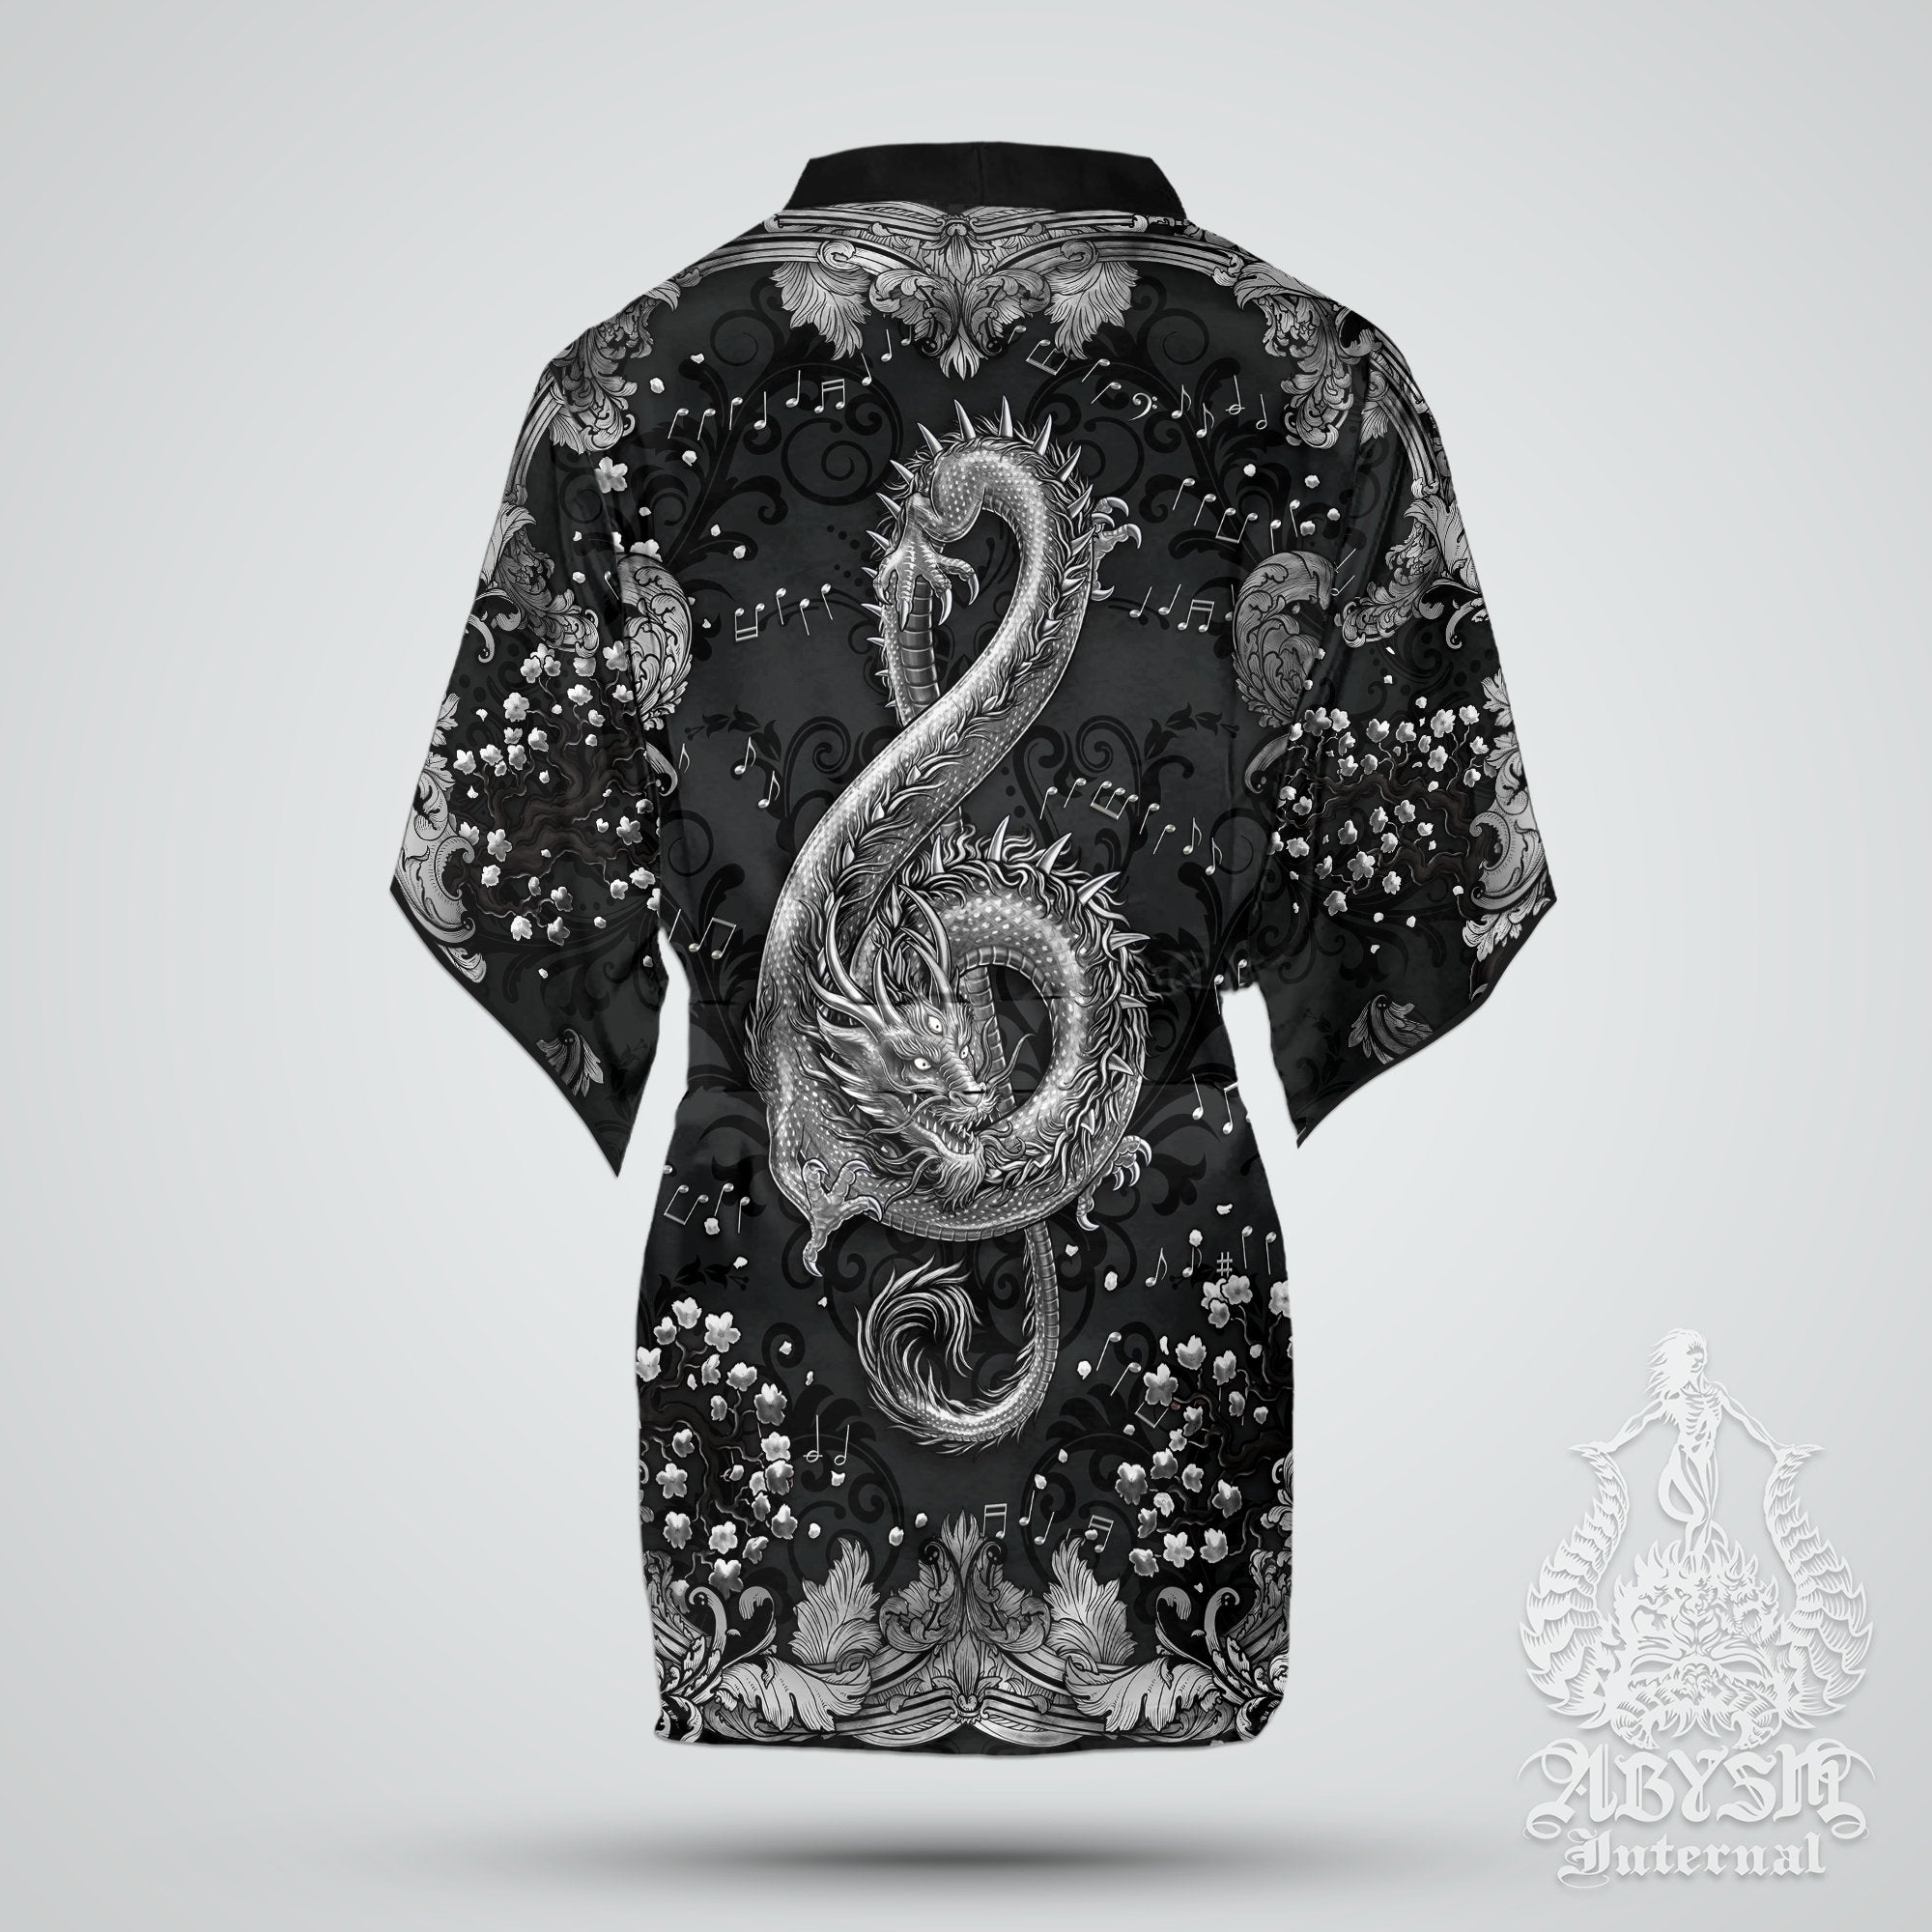 Music Cover Up, Beach Outfit, Party Kimono, Summer Festival Robe, Indie and Alternative Clothing, Unisex - Dragon, Silver Black - Abysm Internal